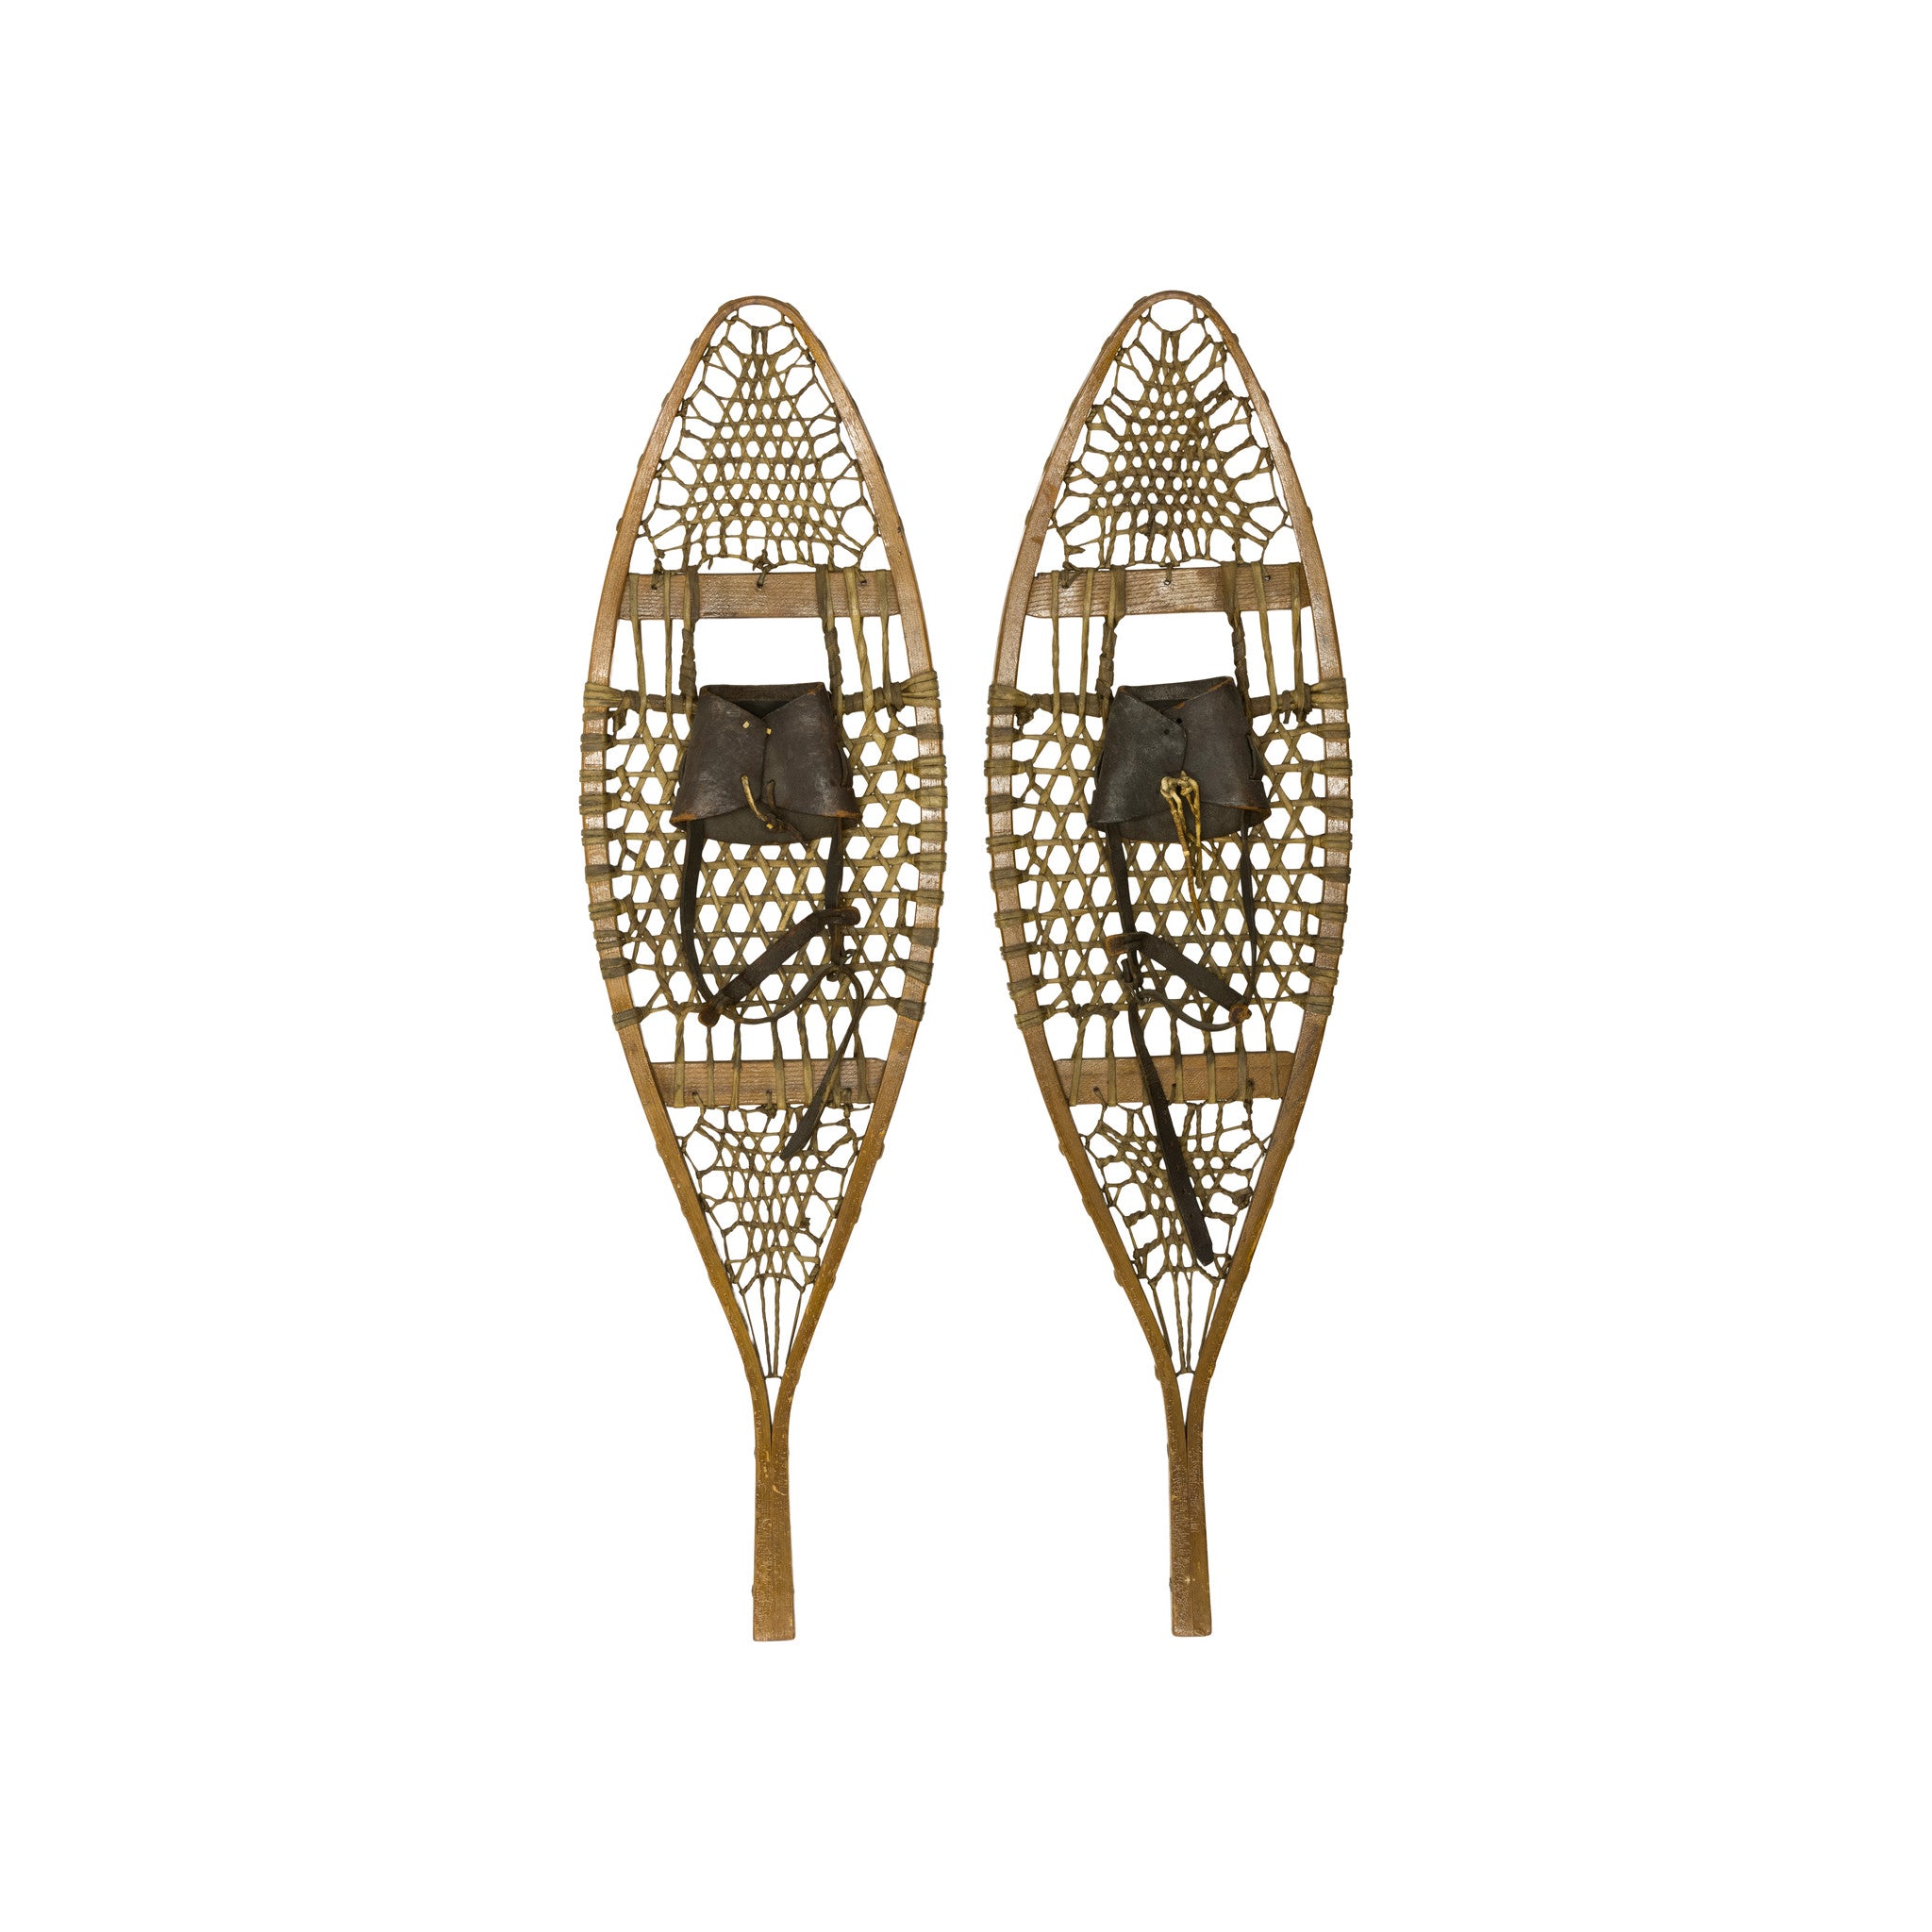 Snowshoes by Northland Ski Mfg., Sporting Goods, Other, Snowshoes